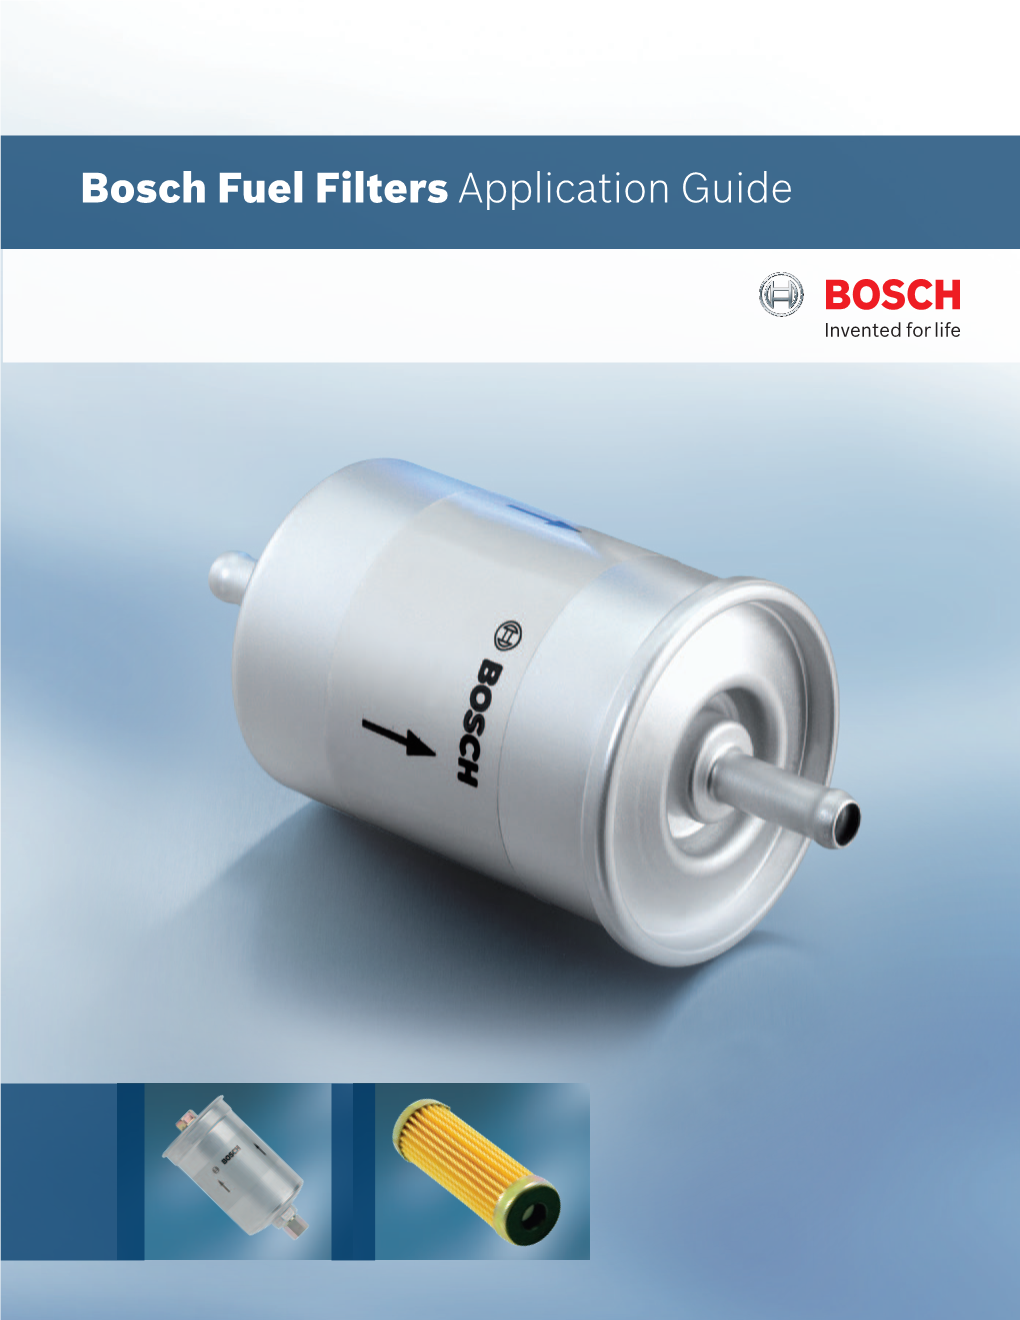 Bosch Fuel Filters Application Guide Bosch Fuel Filters Help to Protect the Most Expensive Parts of the Engine by Filtering out Foreign Particles